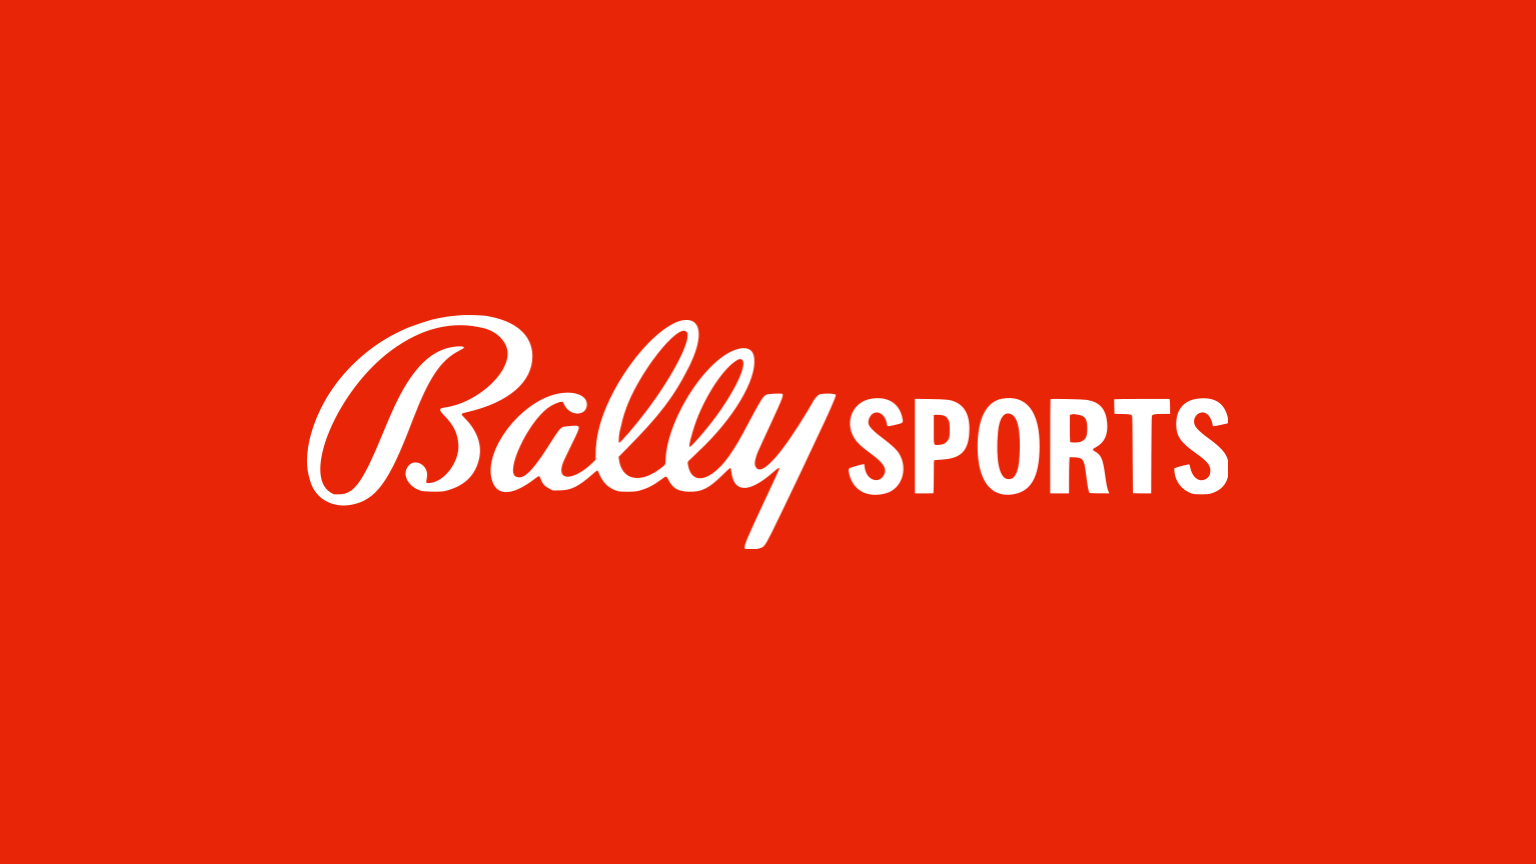 Sinclair to launch $20/month direct-to-consumer streaming service Bally Sports+ on June 23 TechCrunch